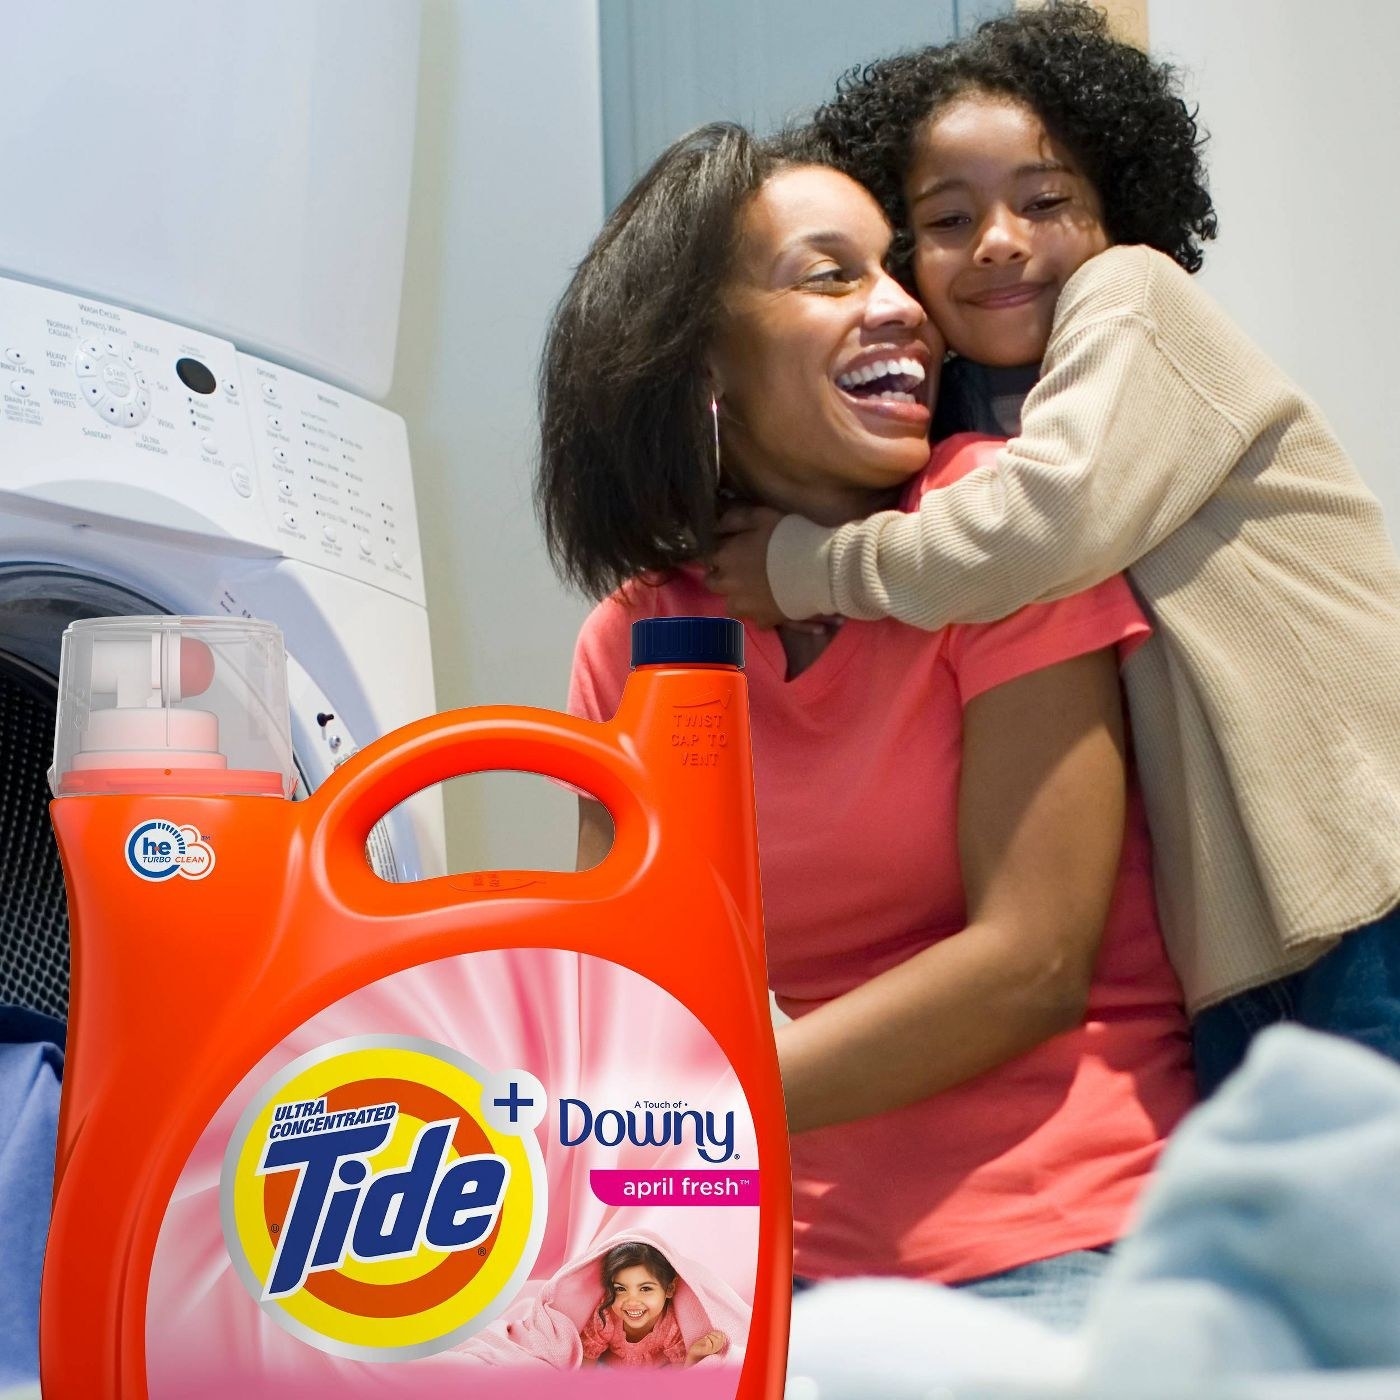 the bottle of detergent overlaid on an image of a mother and daughter